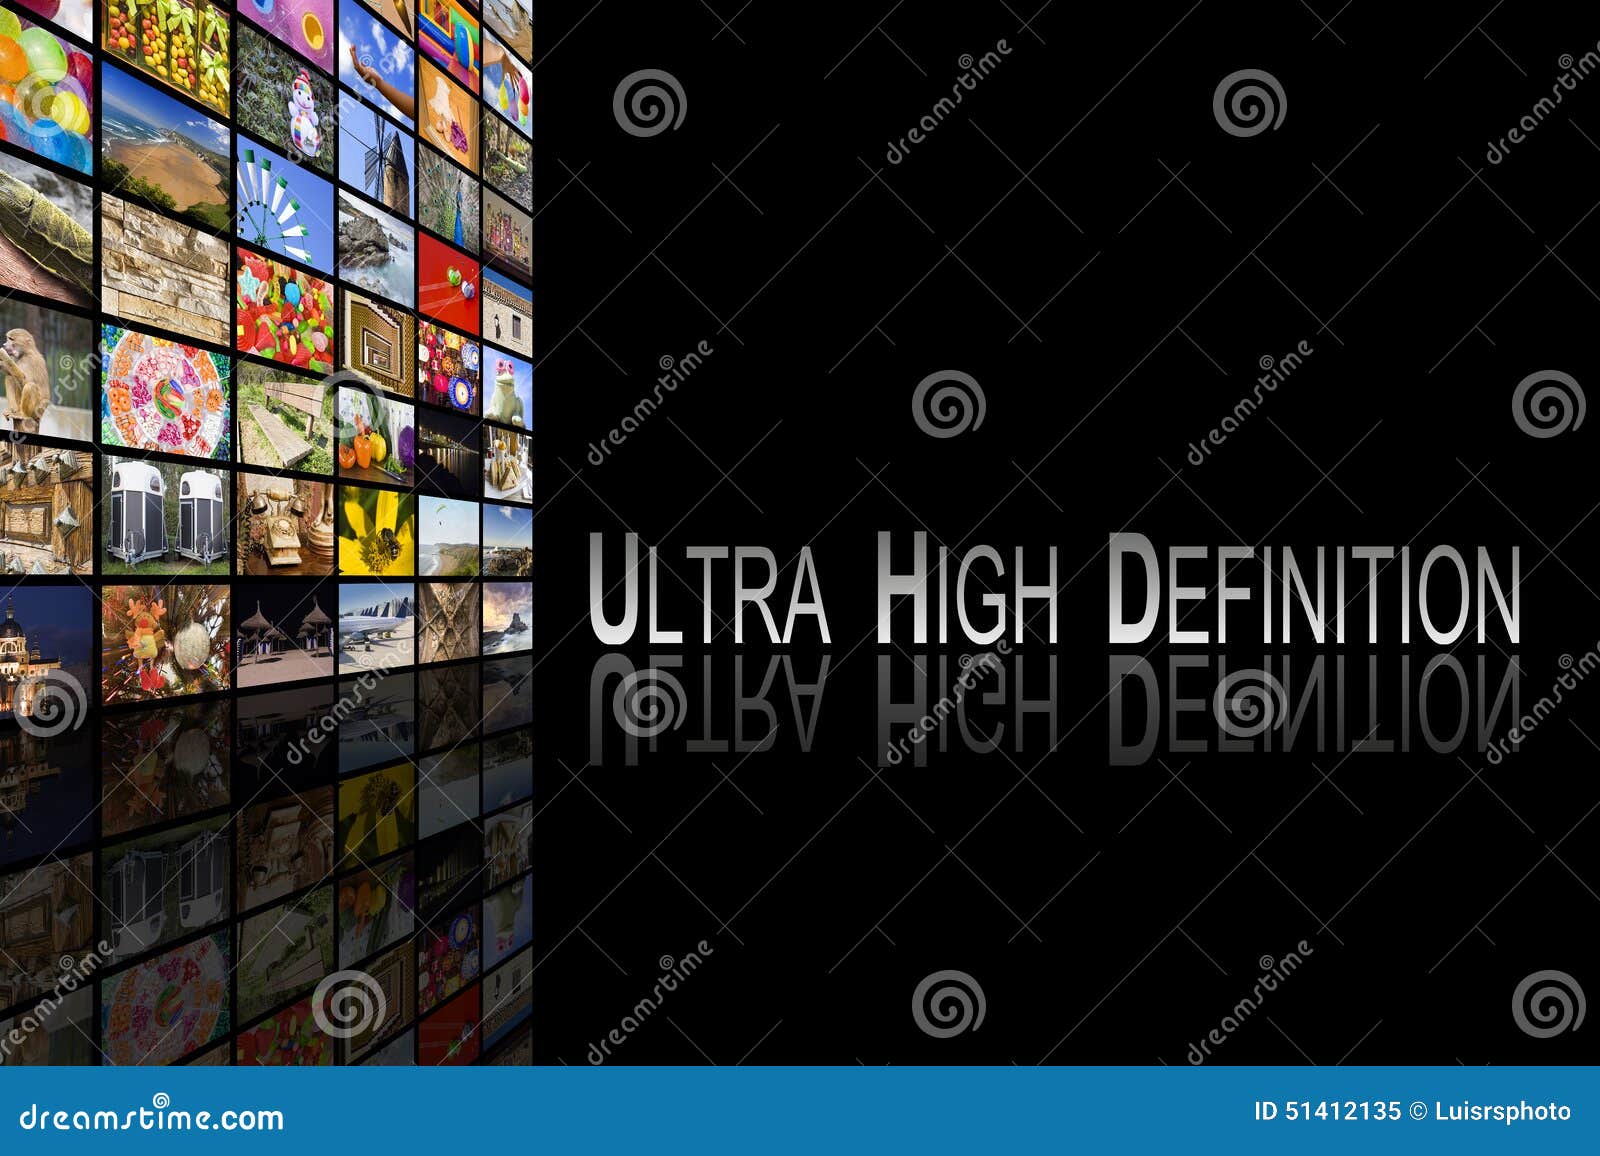 ultra high definition concept